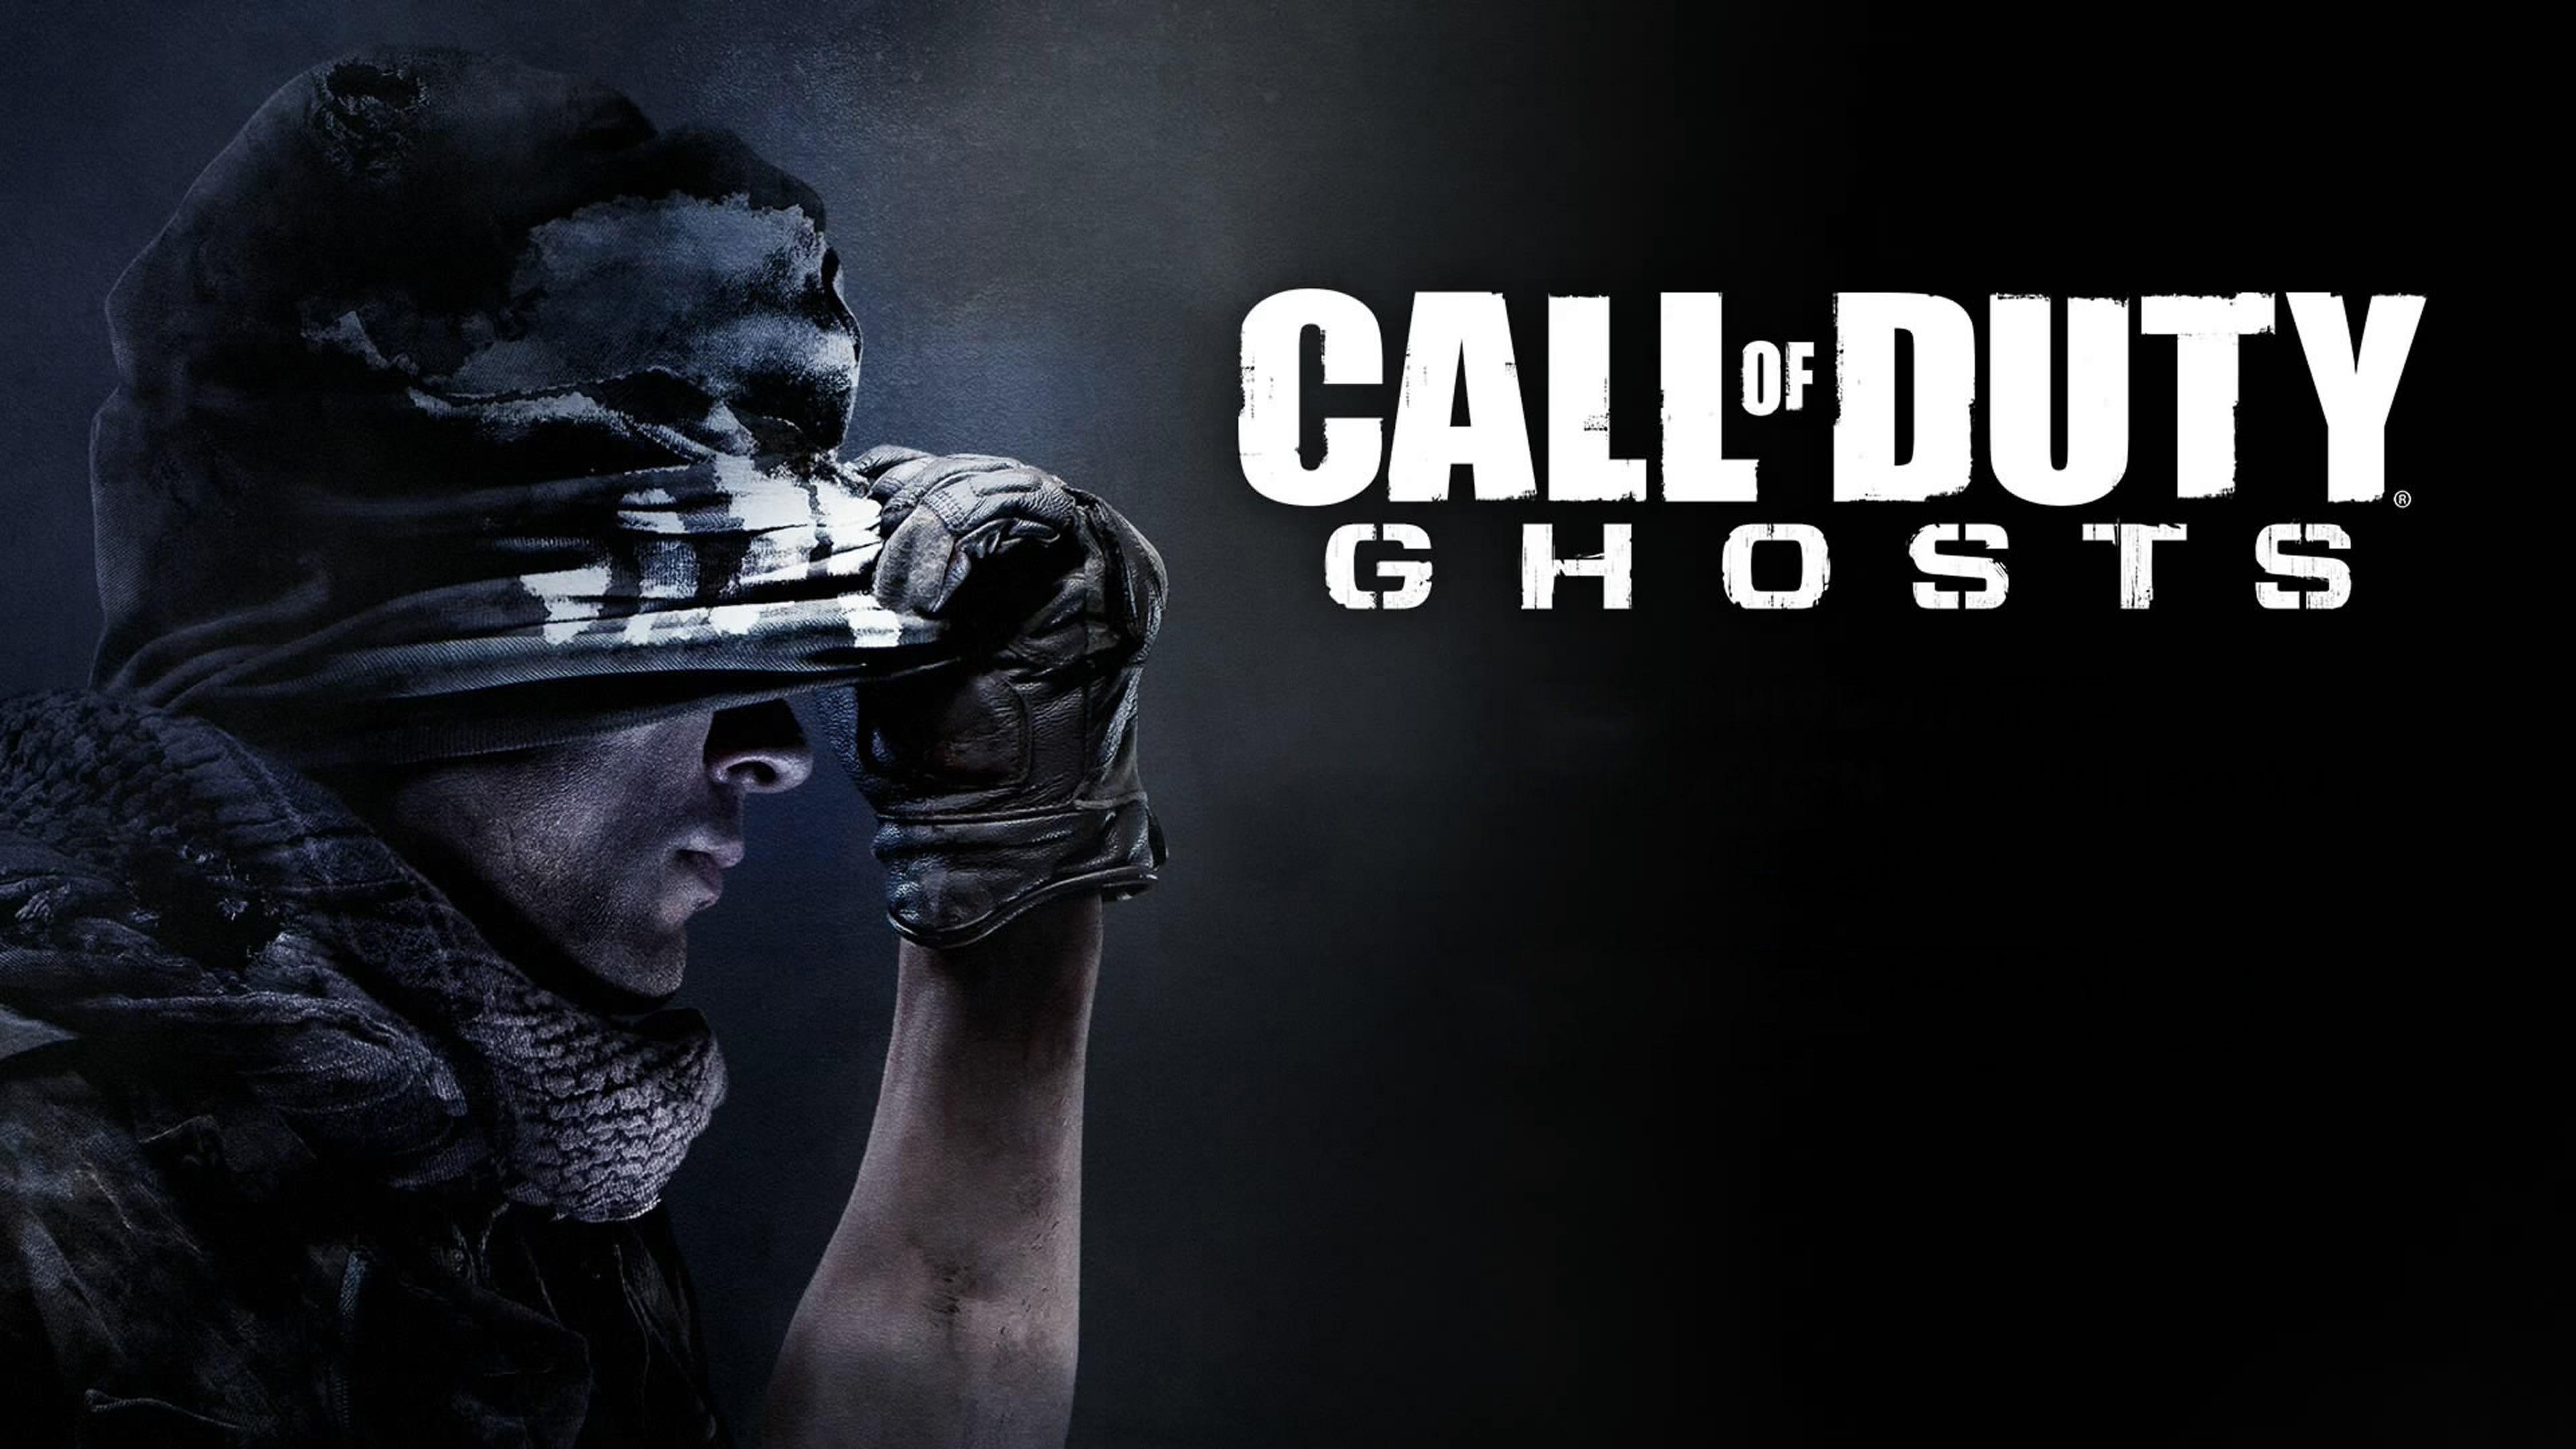 Call of Duty Ghost 4k wallpaper. Call of duty, Play, Film